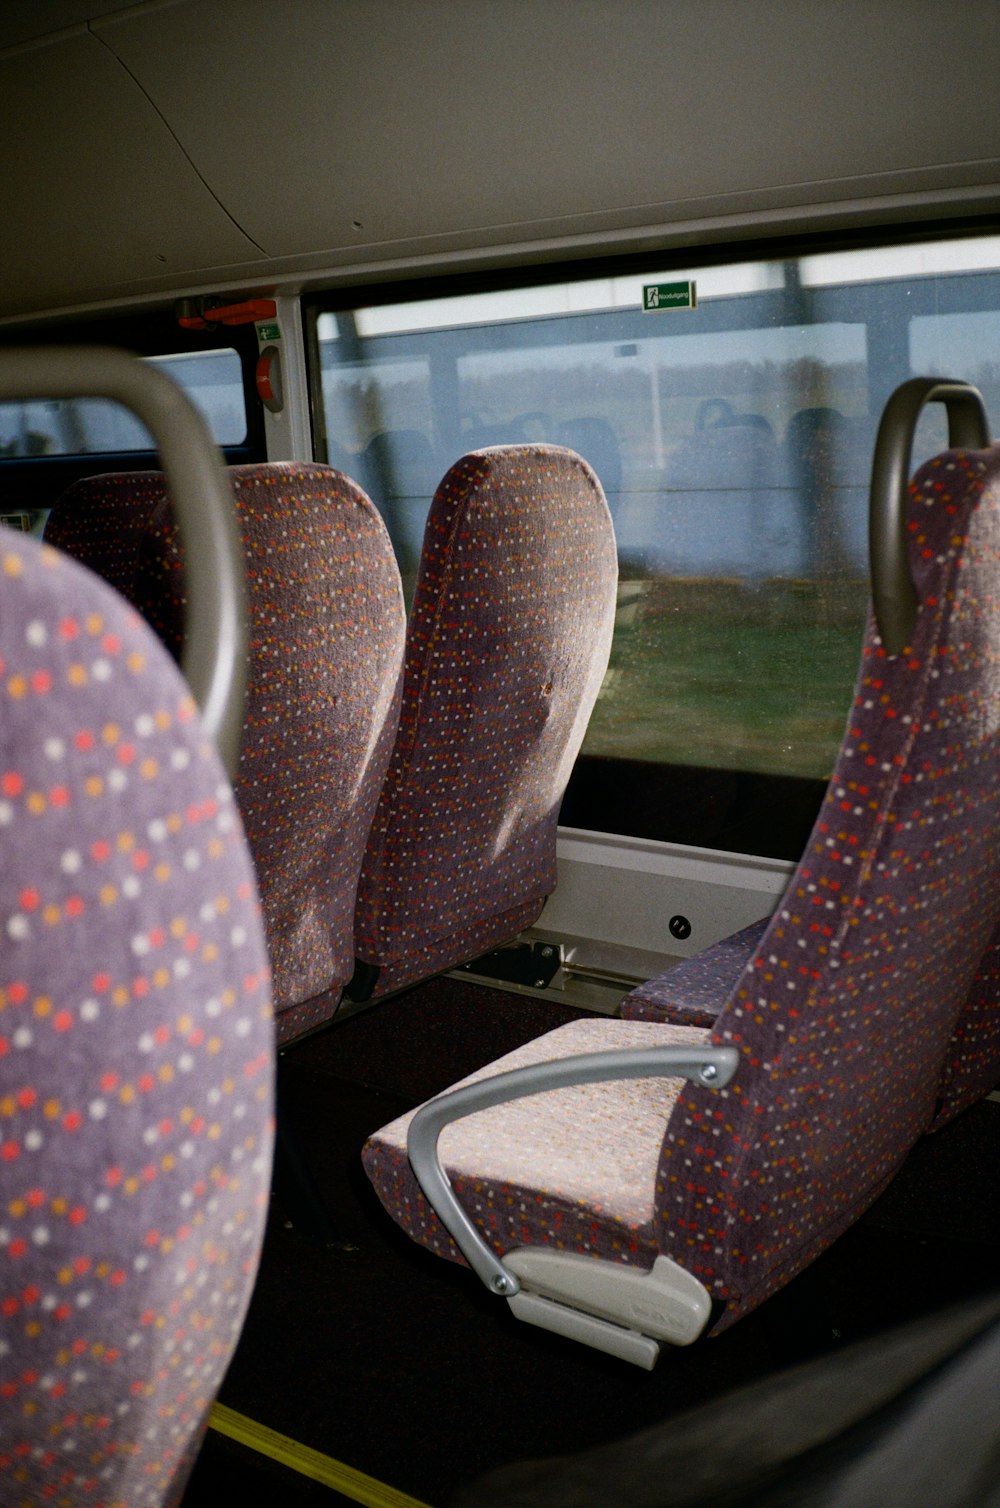 the seats in the bus are covered with colorful spots